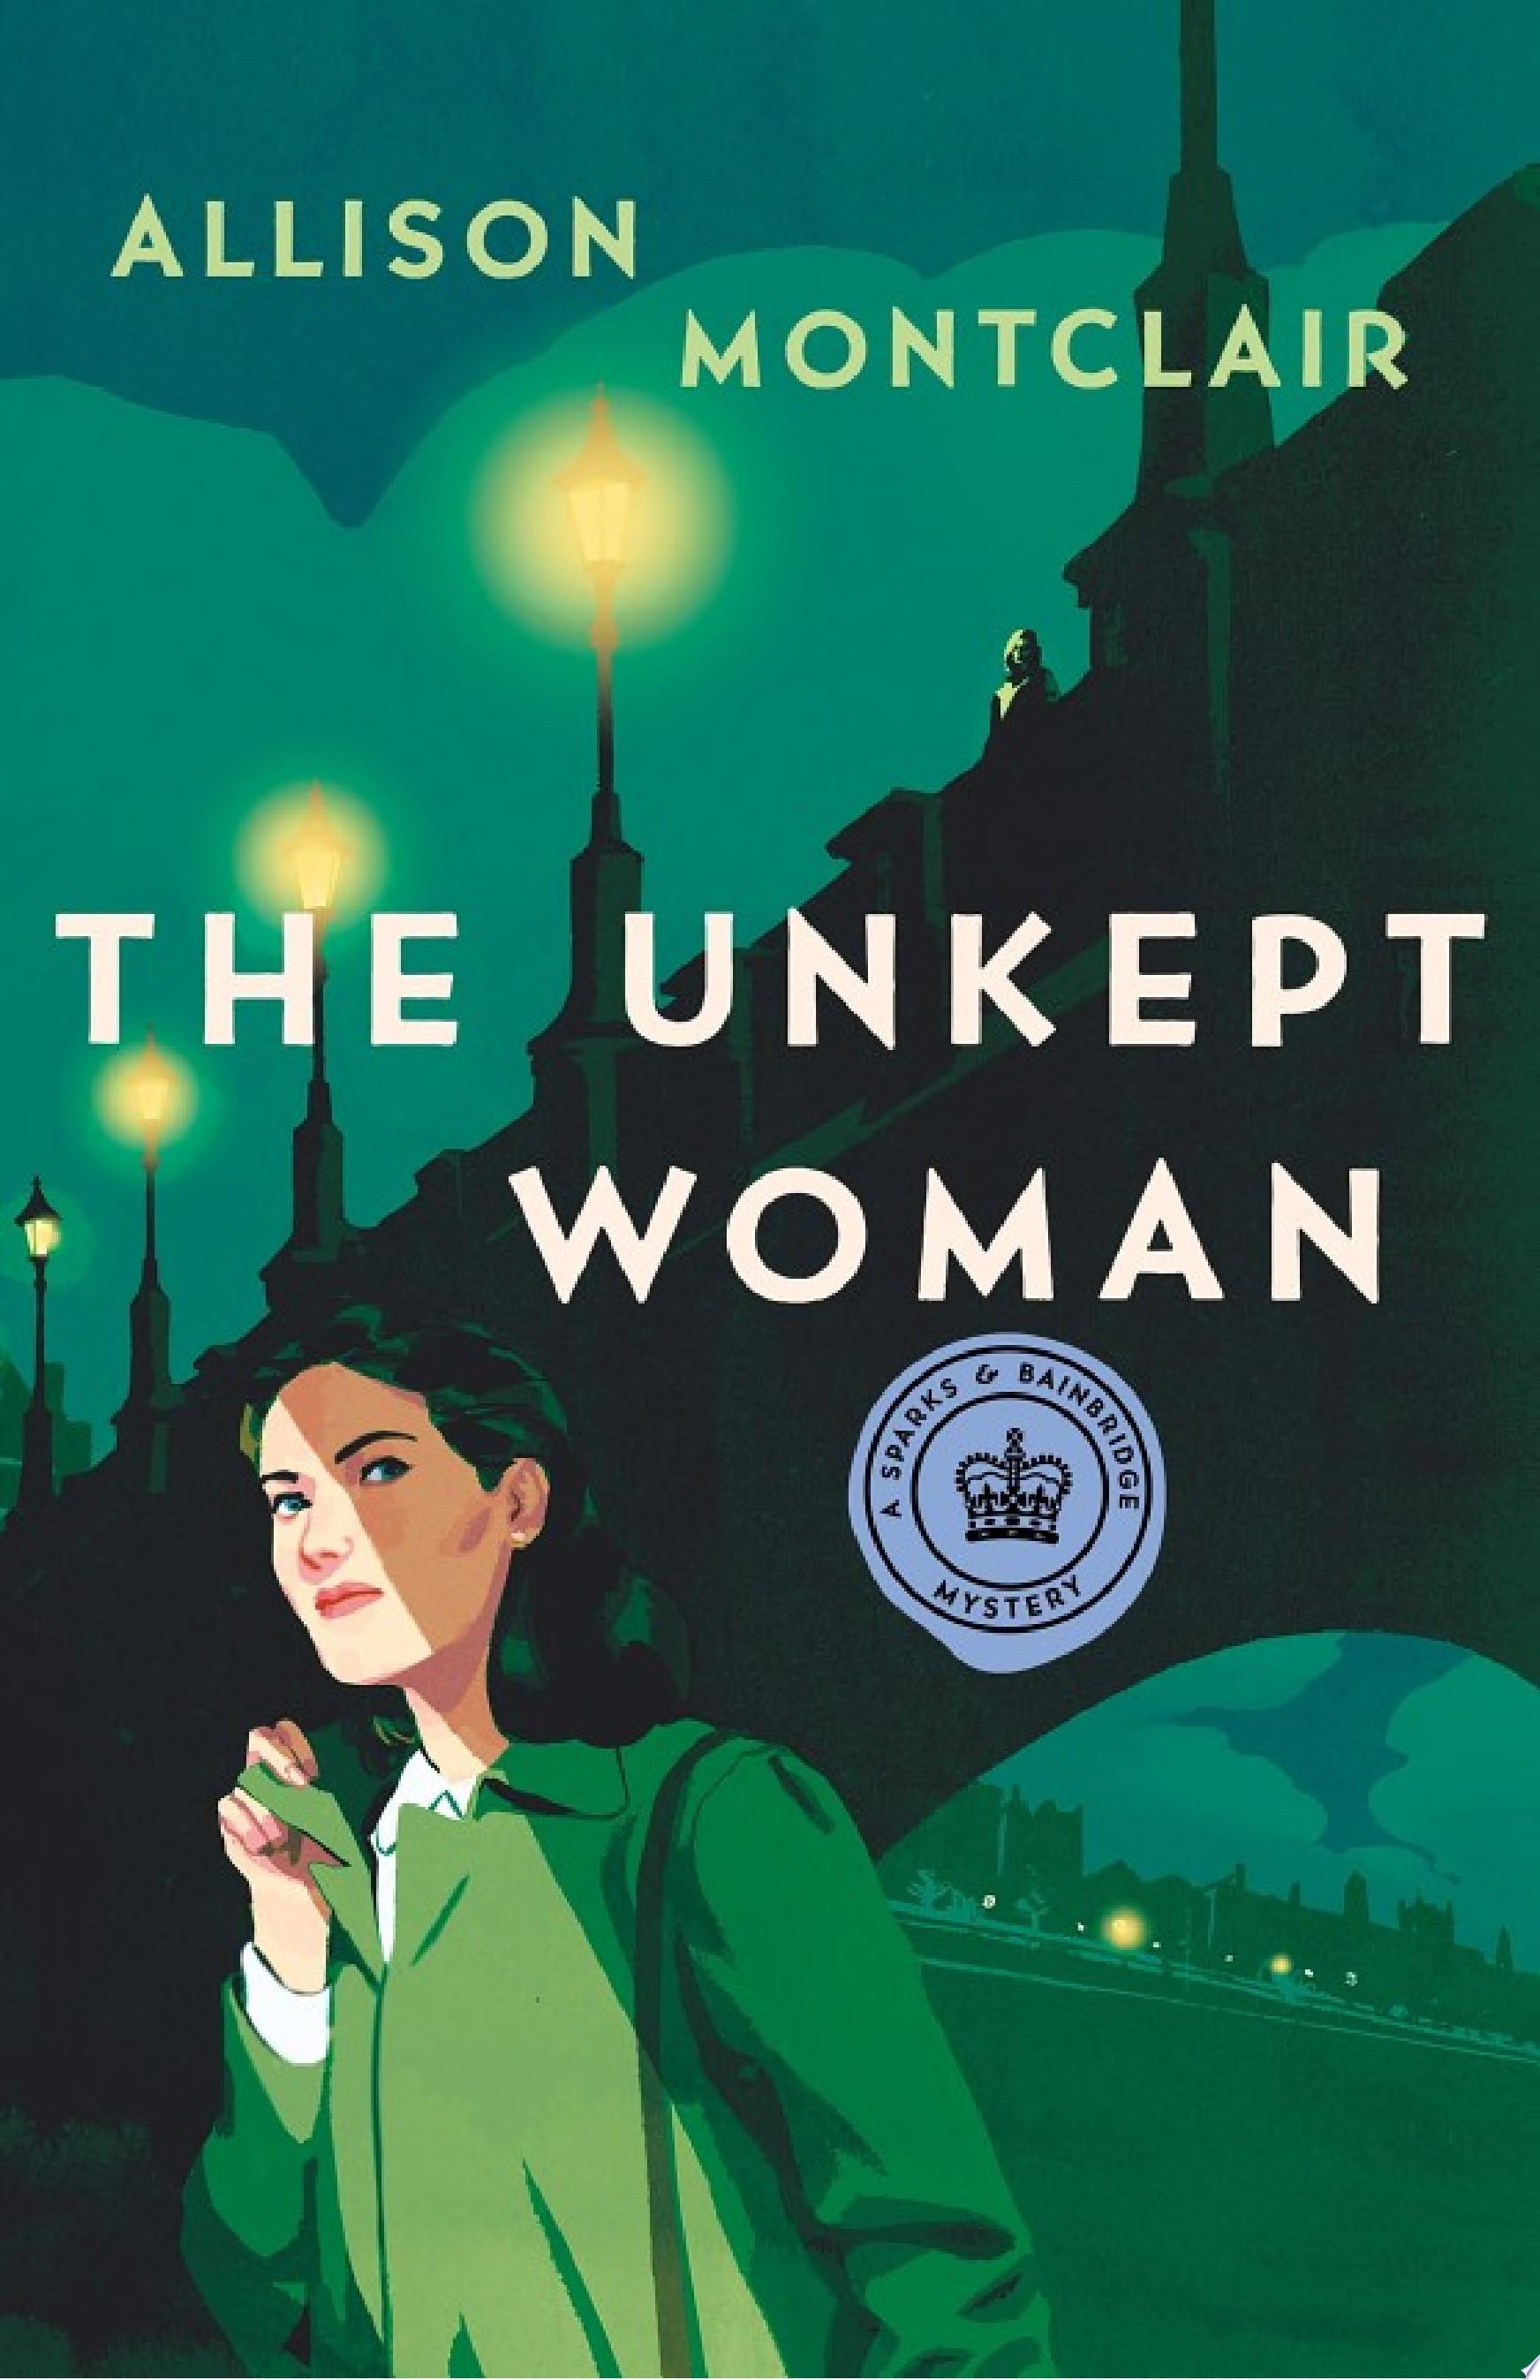 Image for "The Unkept Woman"